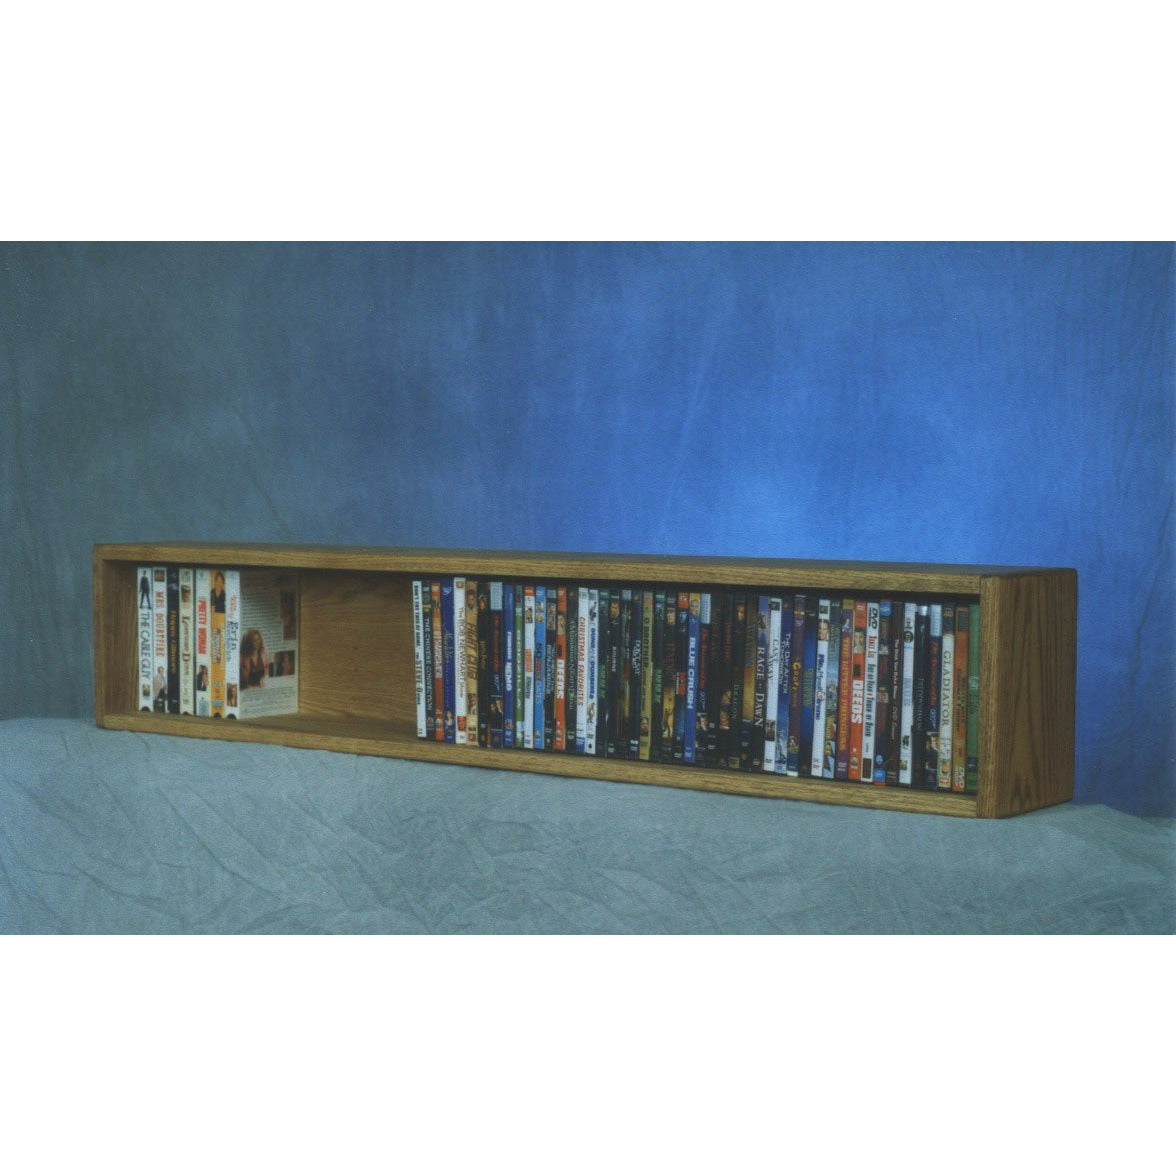 10 Series DVD or Combination Cabinets - 8 sizes